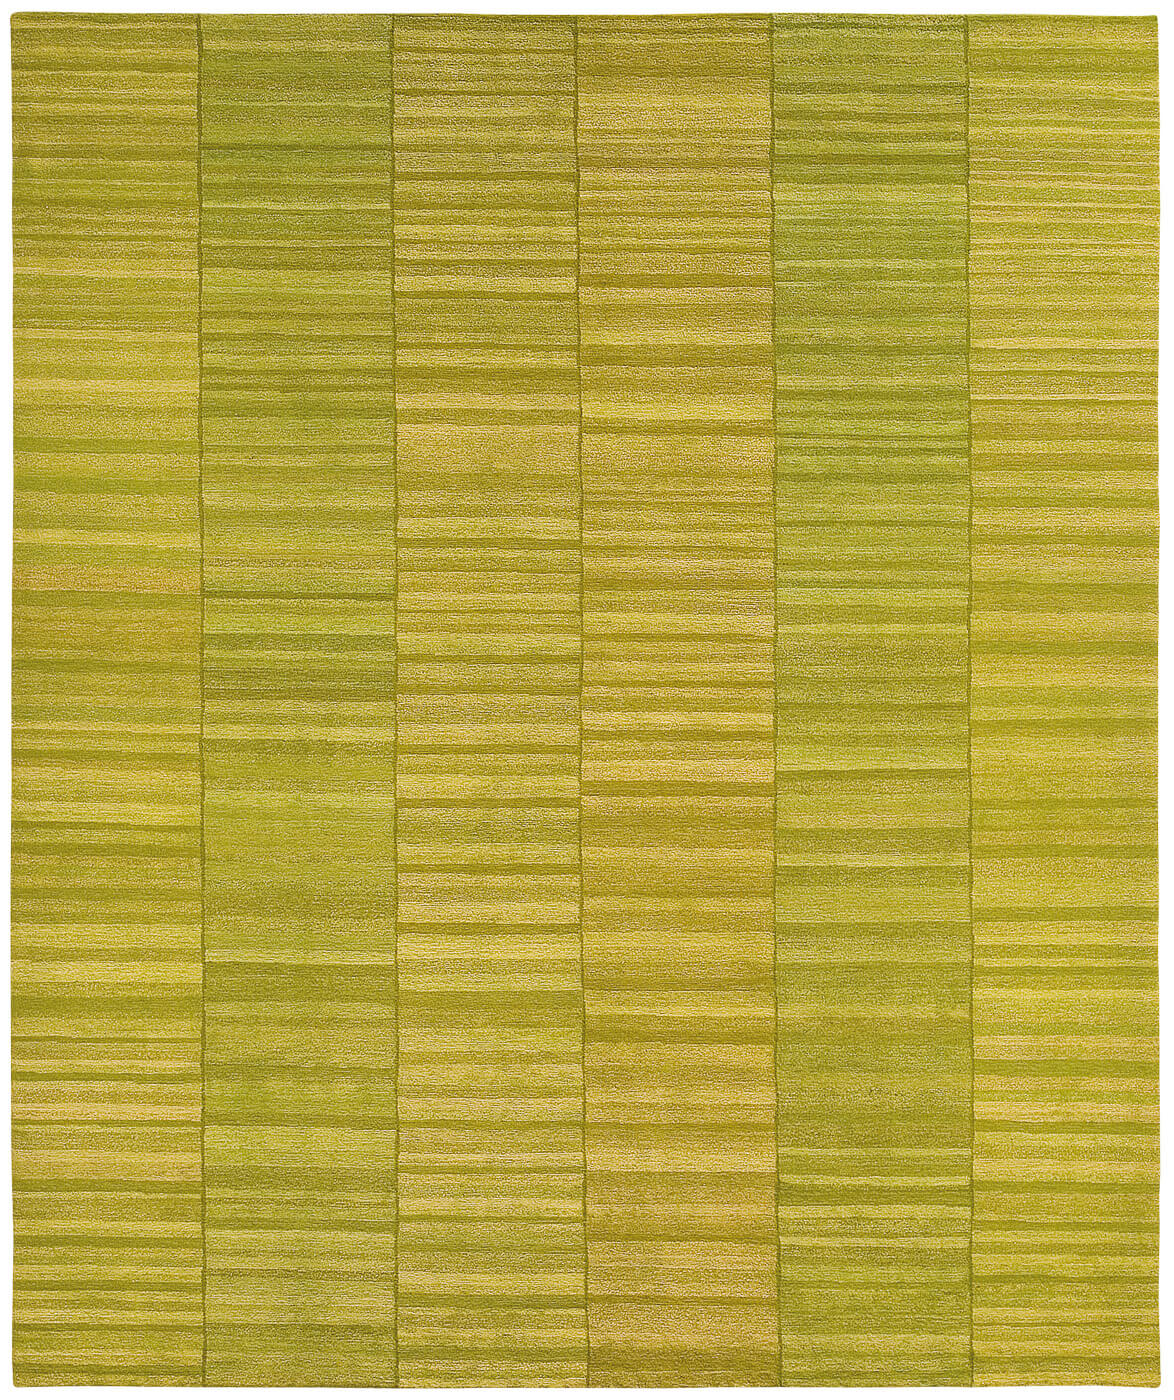 Hand-woven Bright Green Luxury Rug ☞ Size: 250 x 300 cm